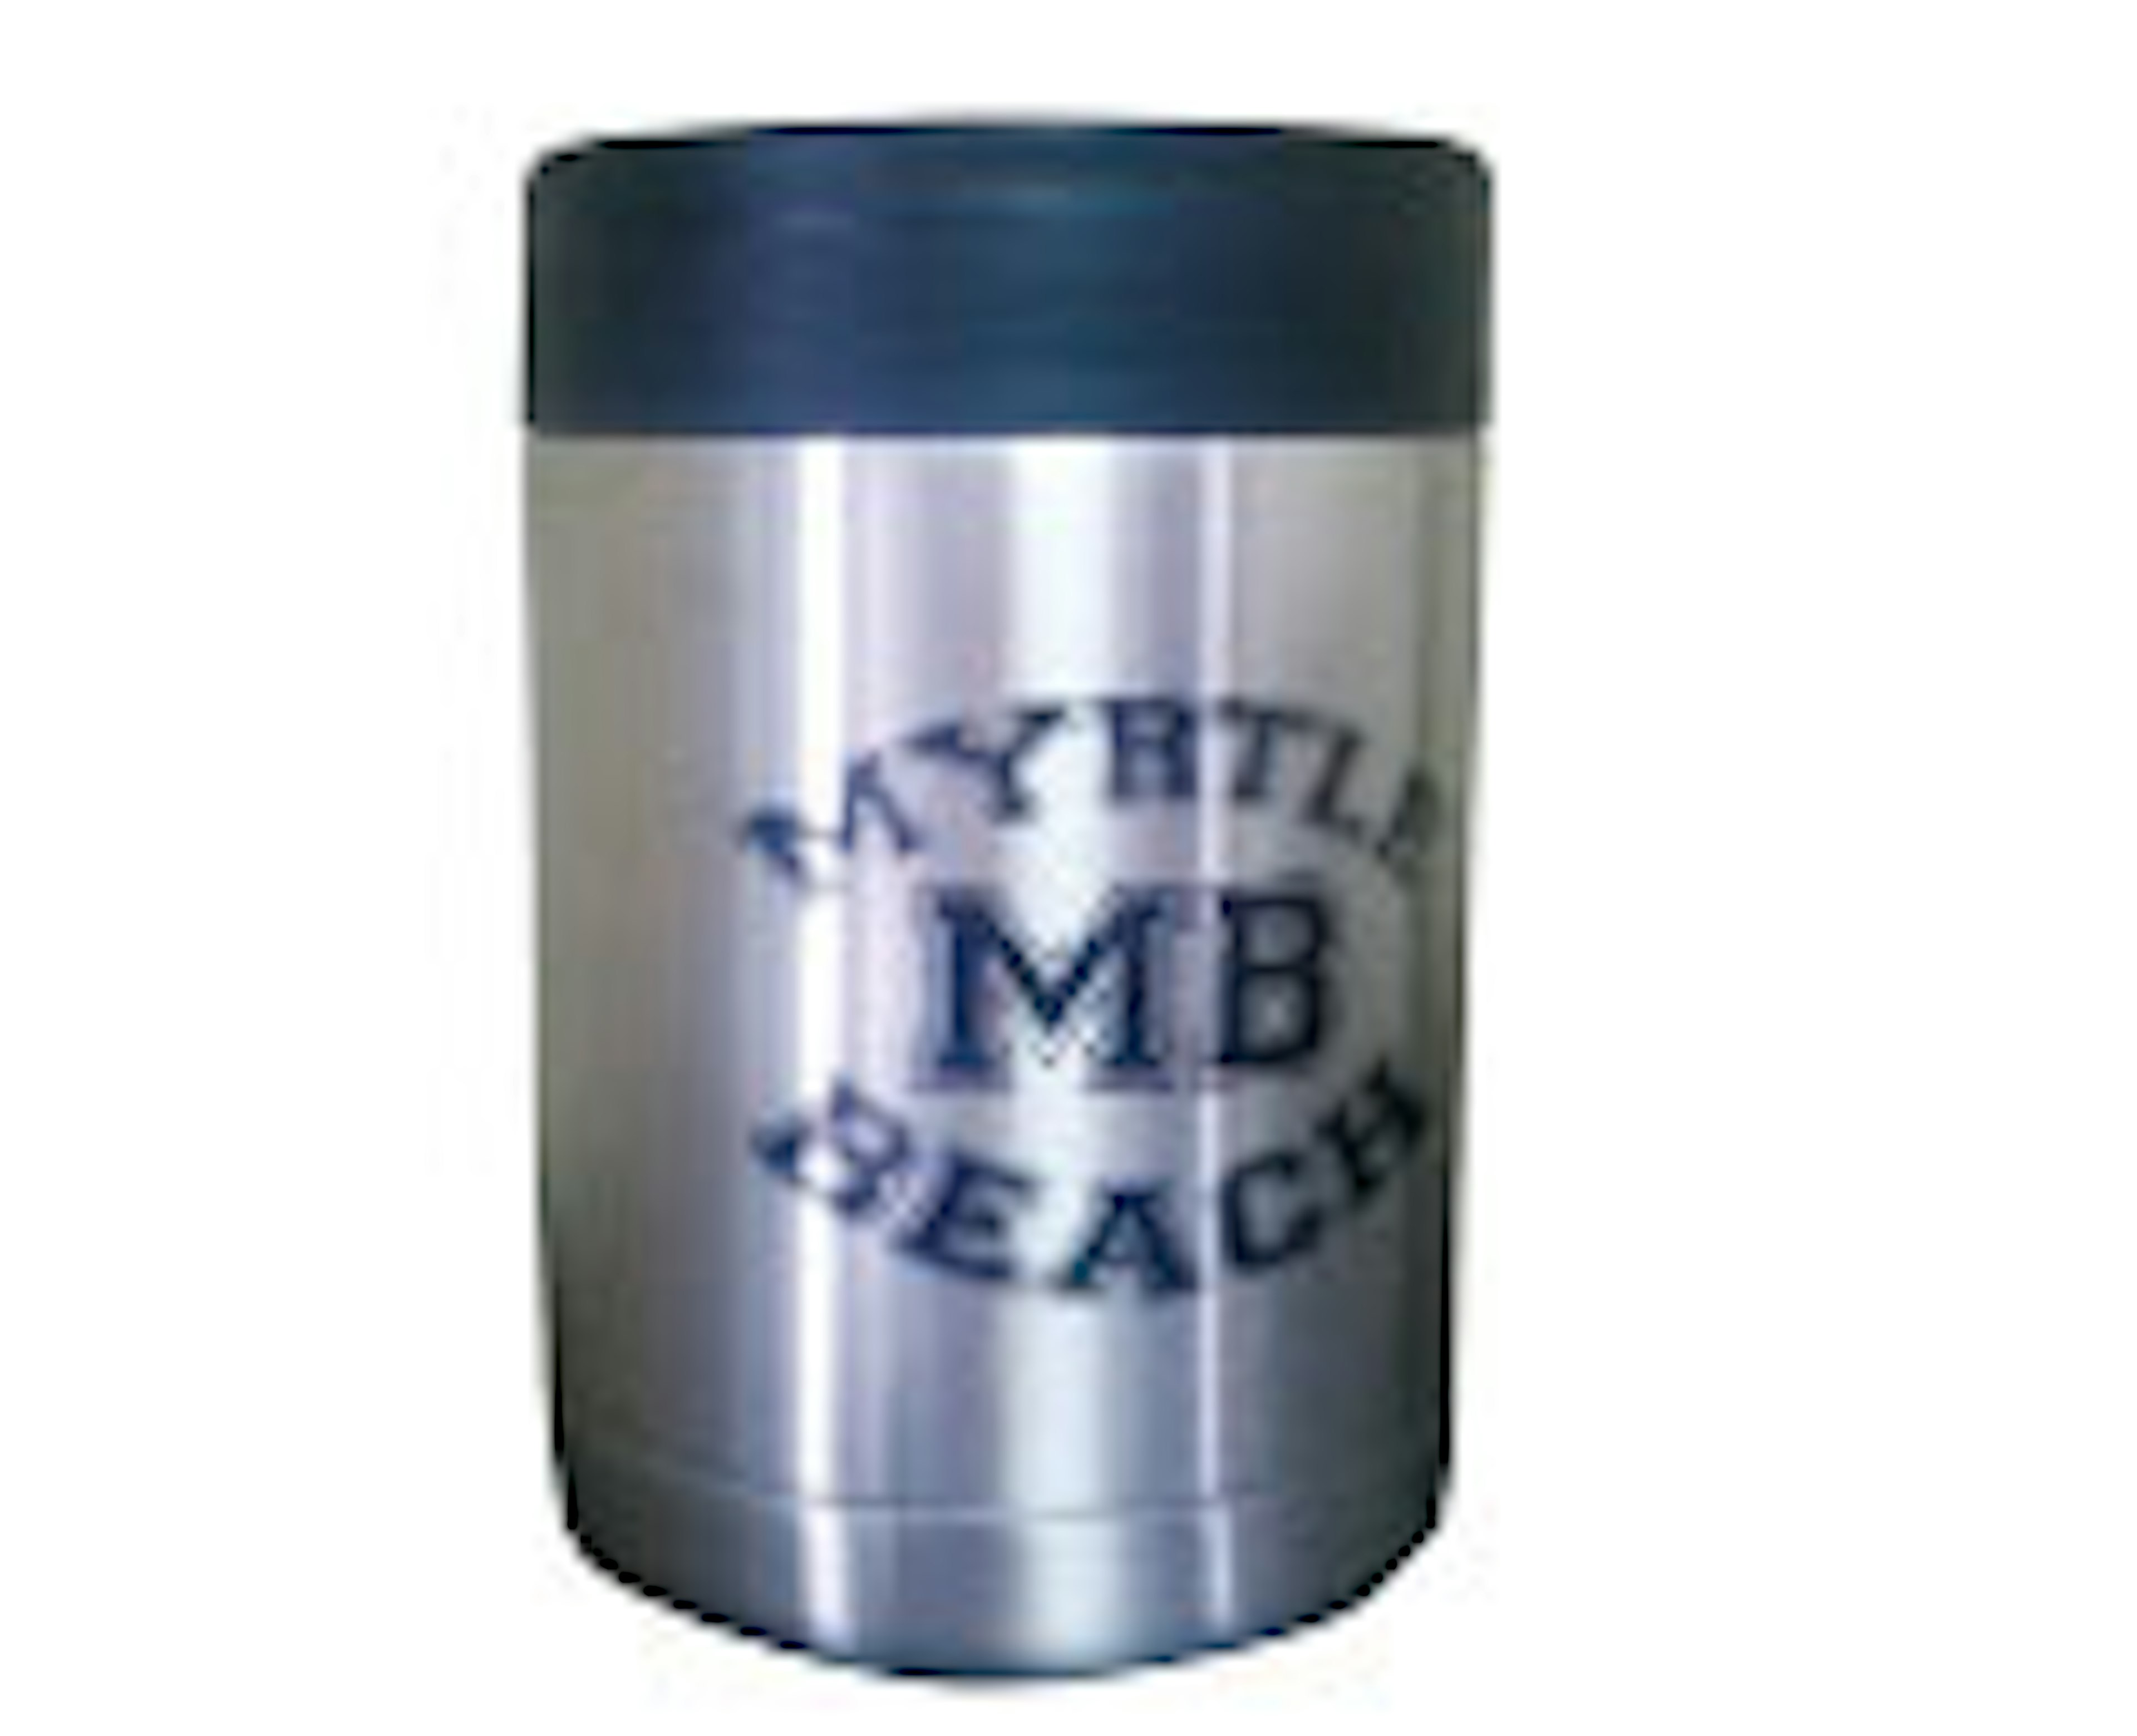 ONLY $6.99 Heavy Duty Stainless Steel Insulated Tumbler